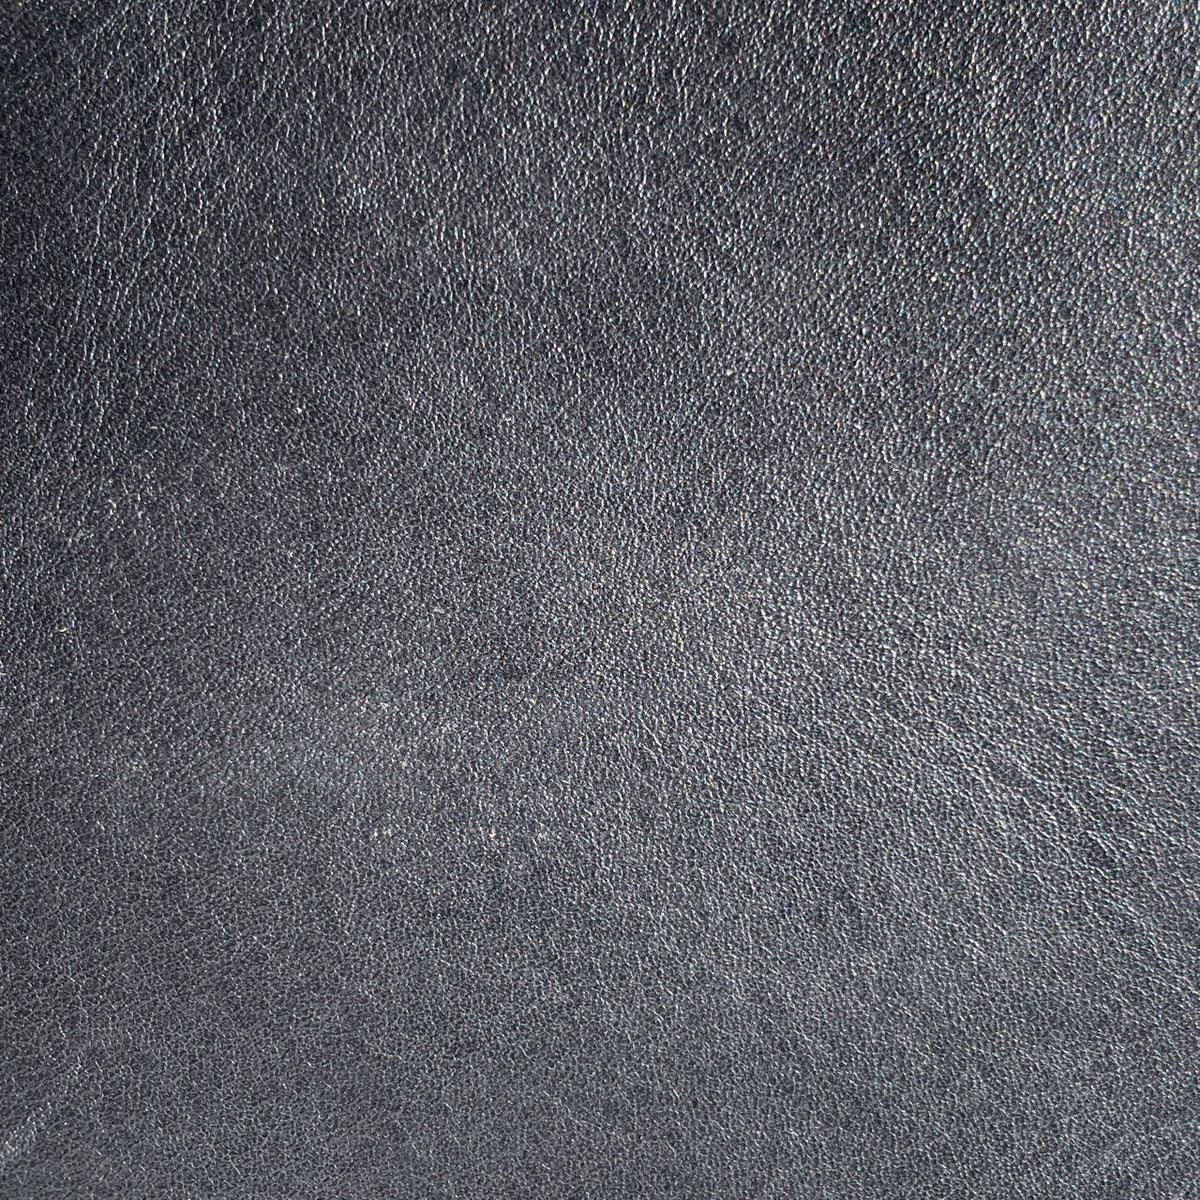 Tuscany Cow Half Sides | Black | 2.2mm | 10-12 sq.ft | From $225 ea.